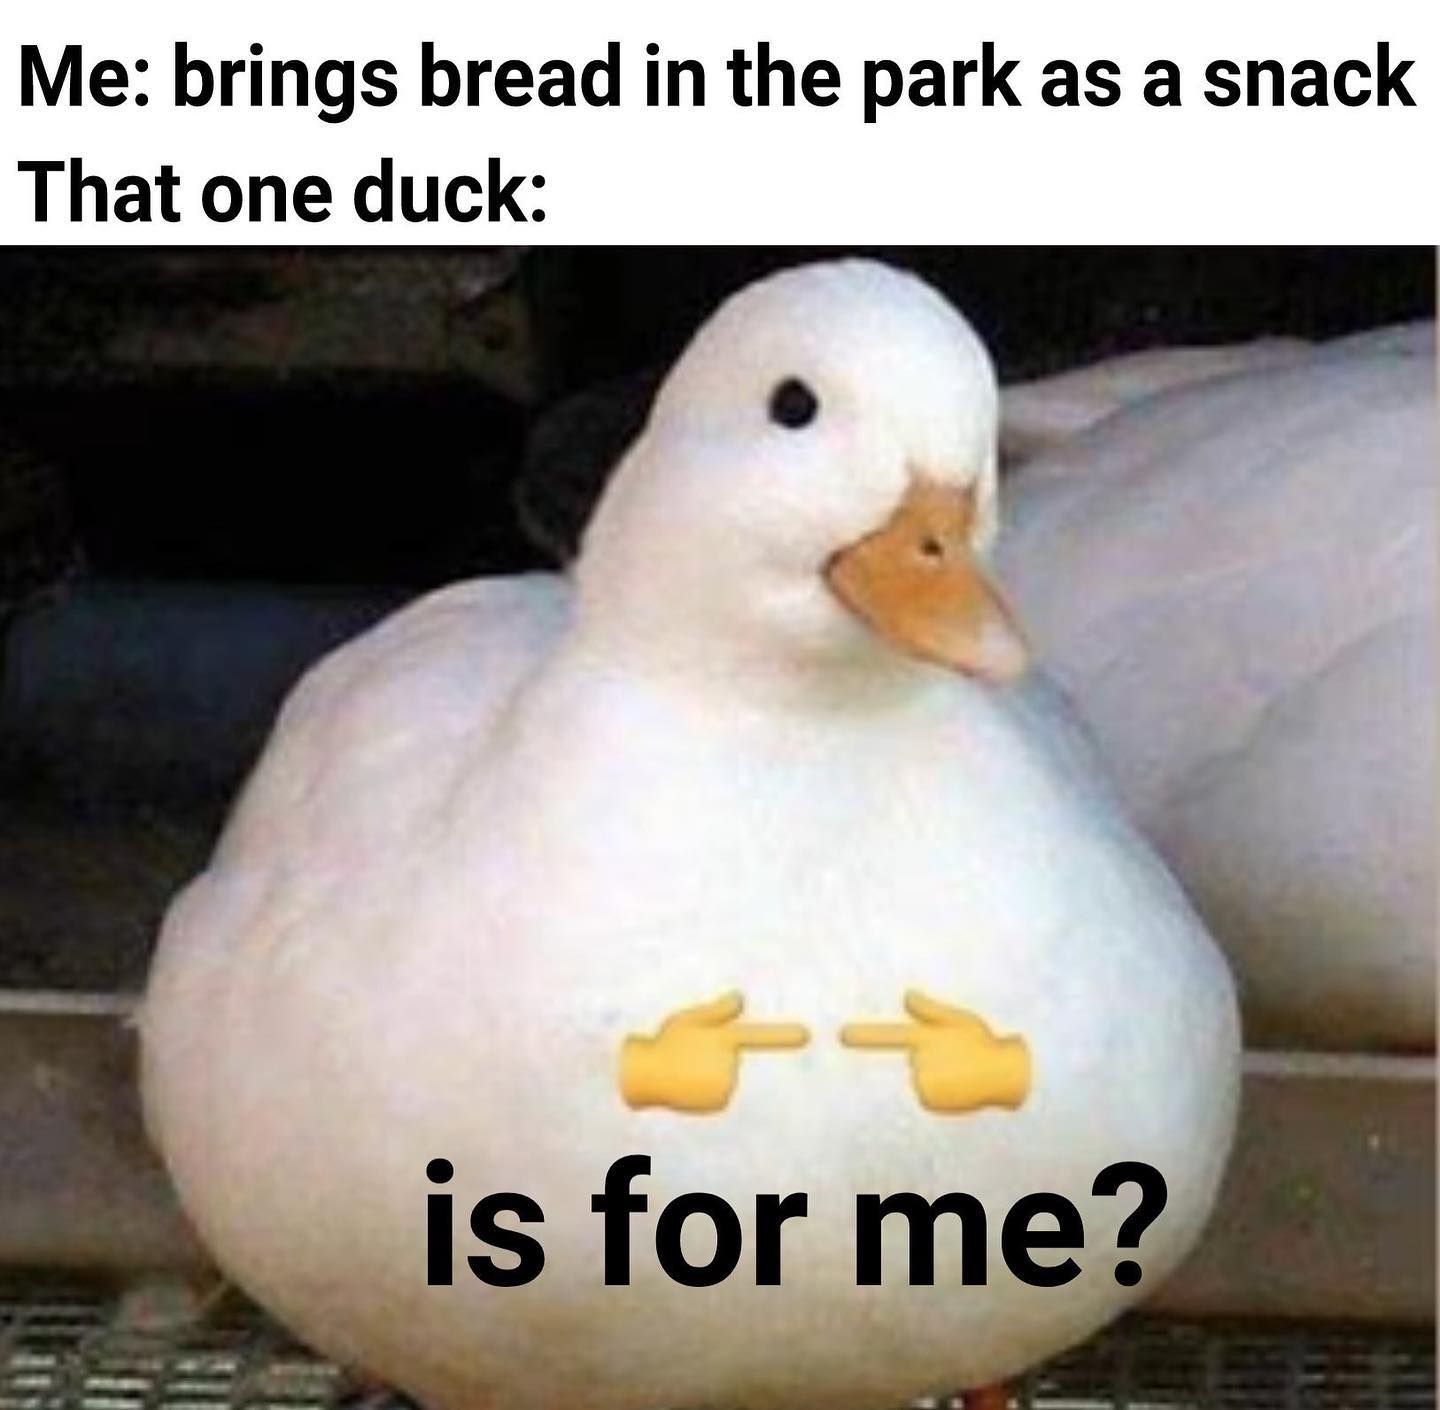 is for me? emoji meme - nice duck - Me brings bread in the park as a snack That one duck is for me?